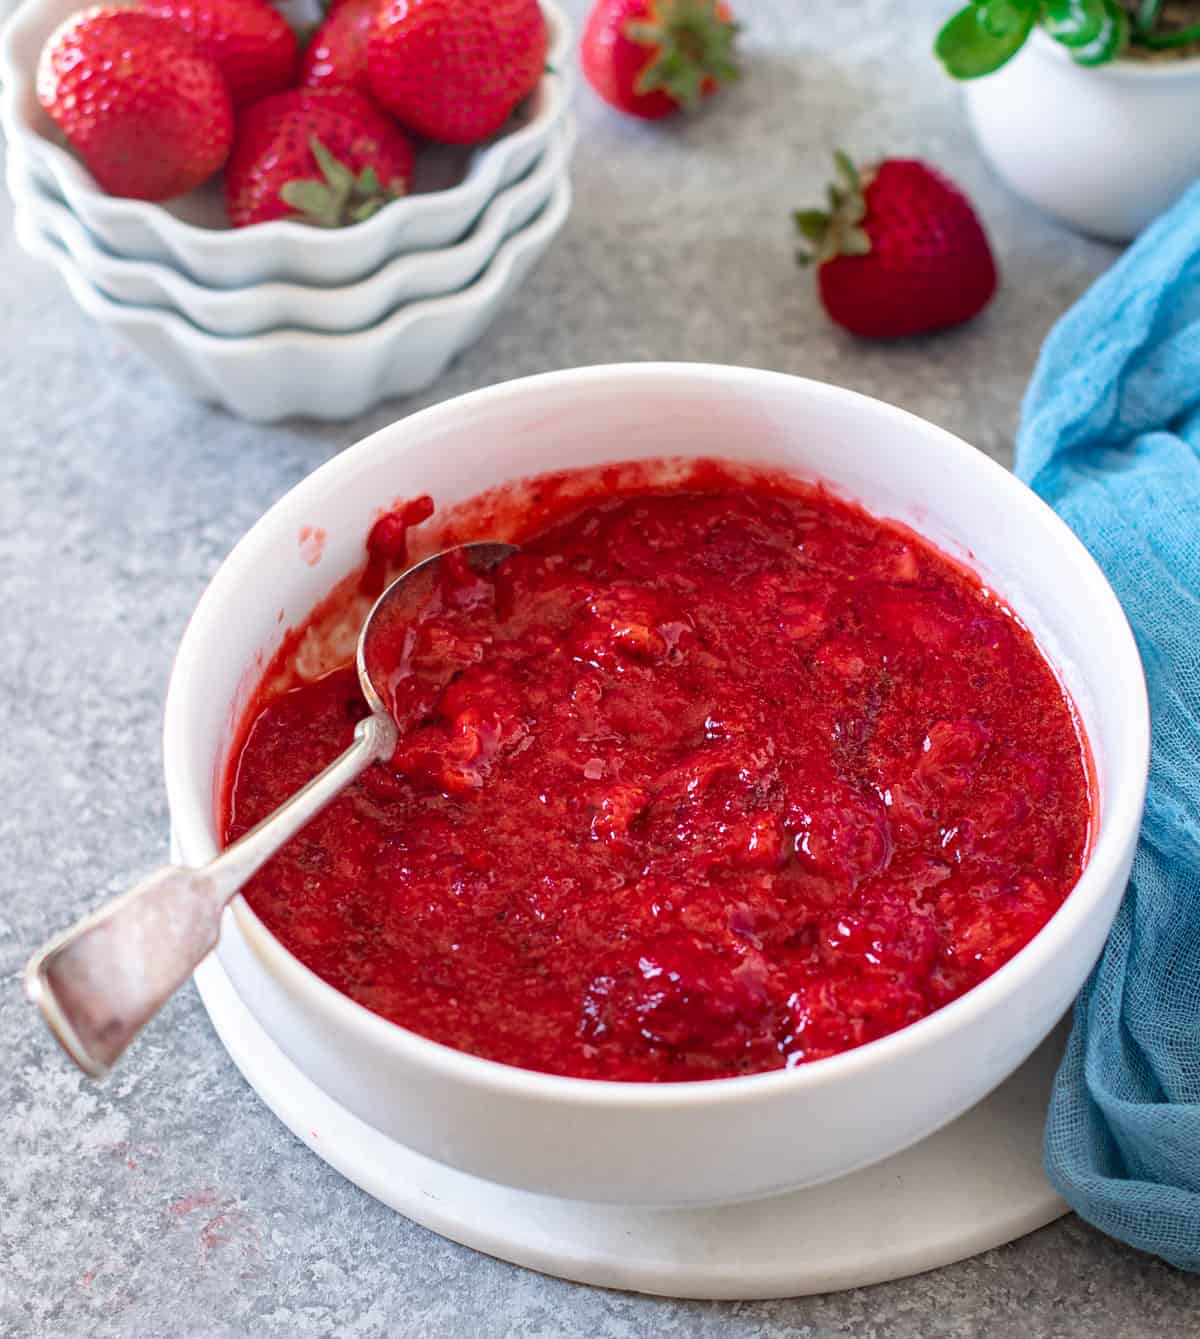 Strawberry filling in a white bowl with blue napkin